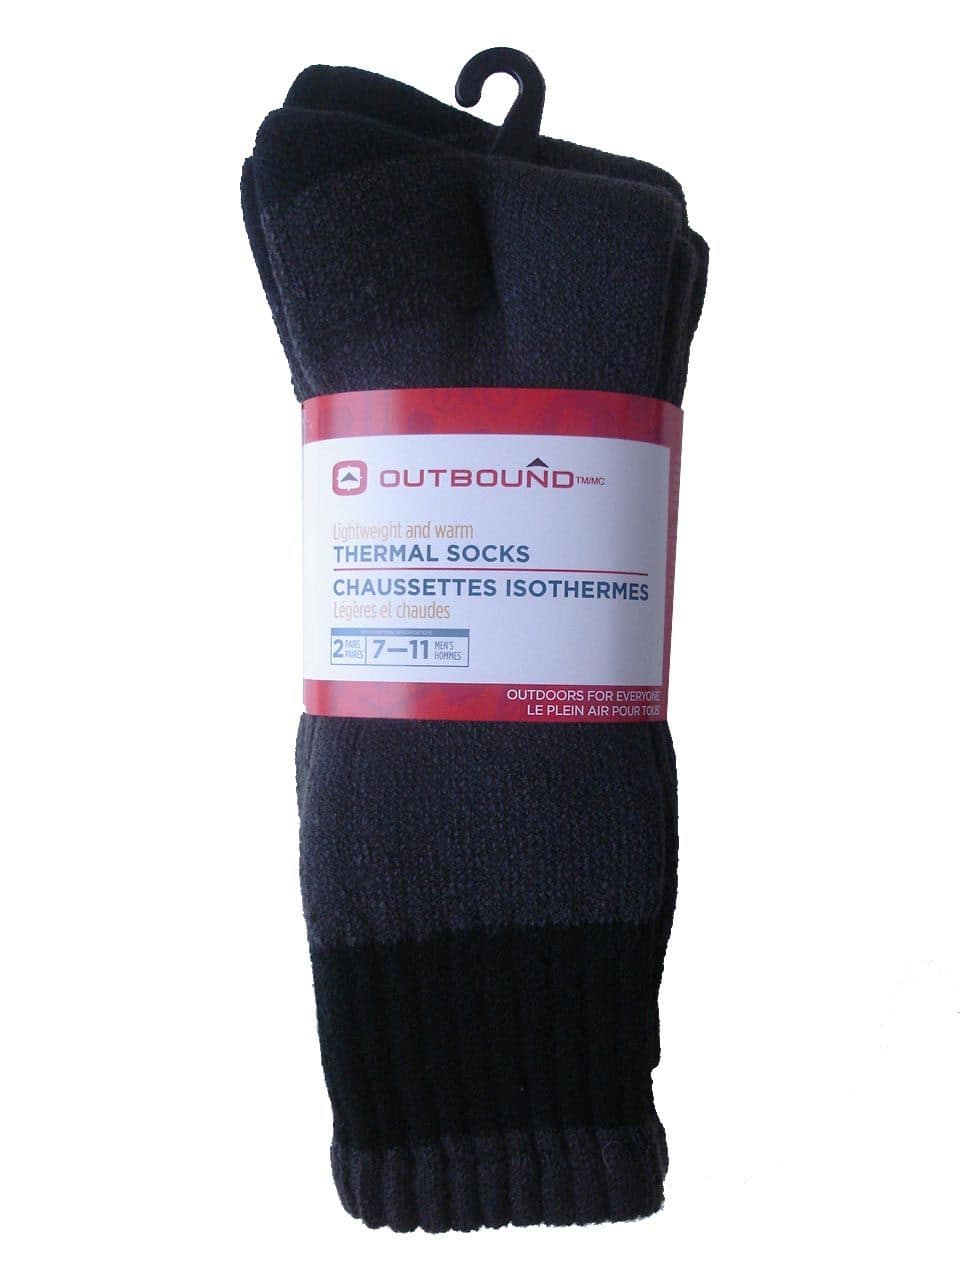 Outbound Men's Lightweight Warm Thermal Socks, 2-pk, Charcoal ...